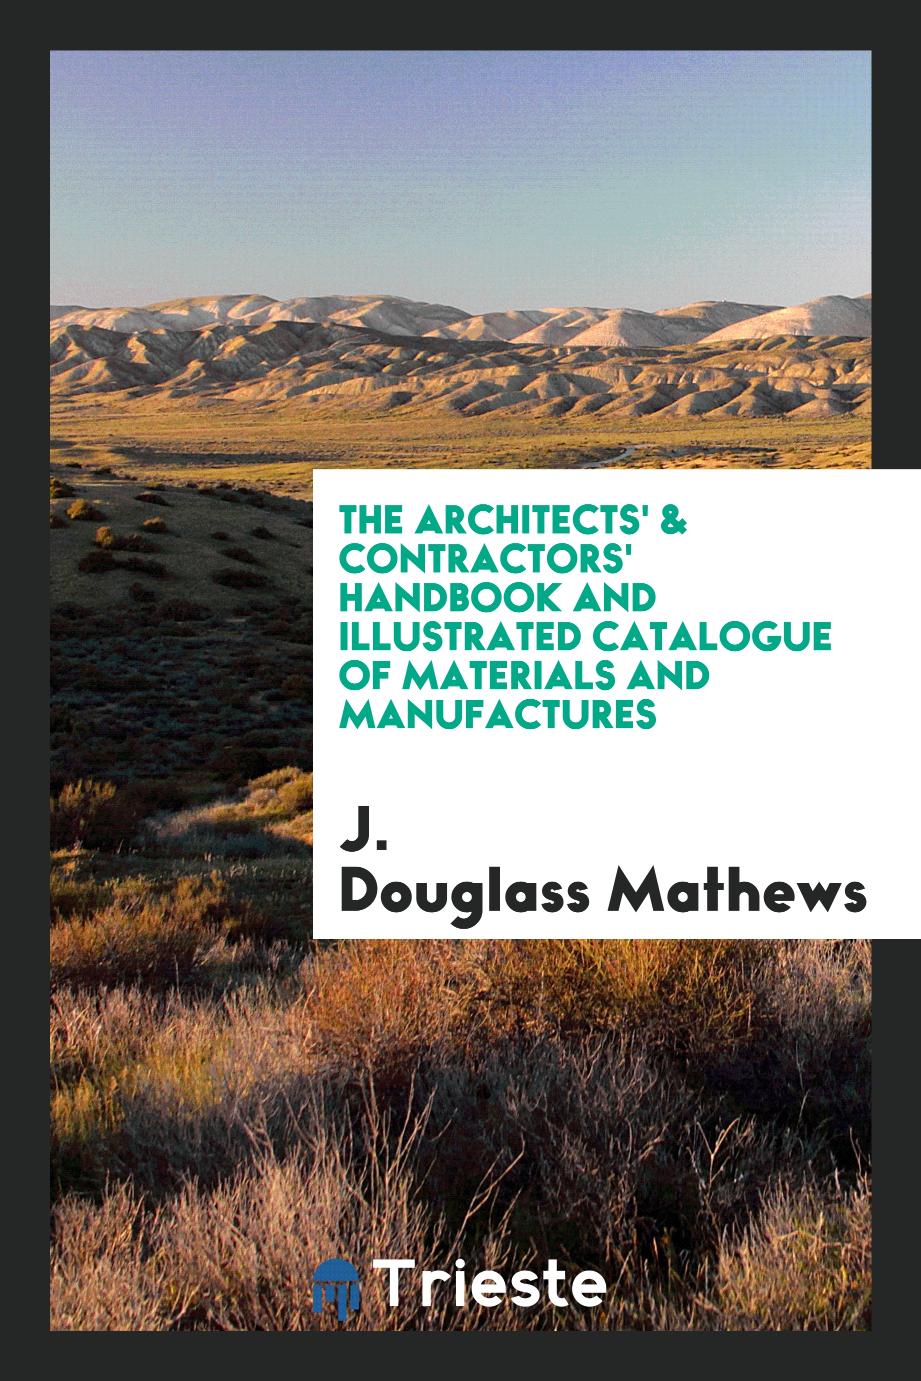 The Architects' & Contractors' Handbook and Illustrated Catalogue of Materials and Manufactures